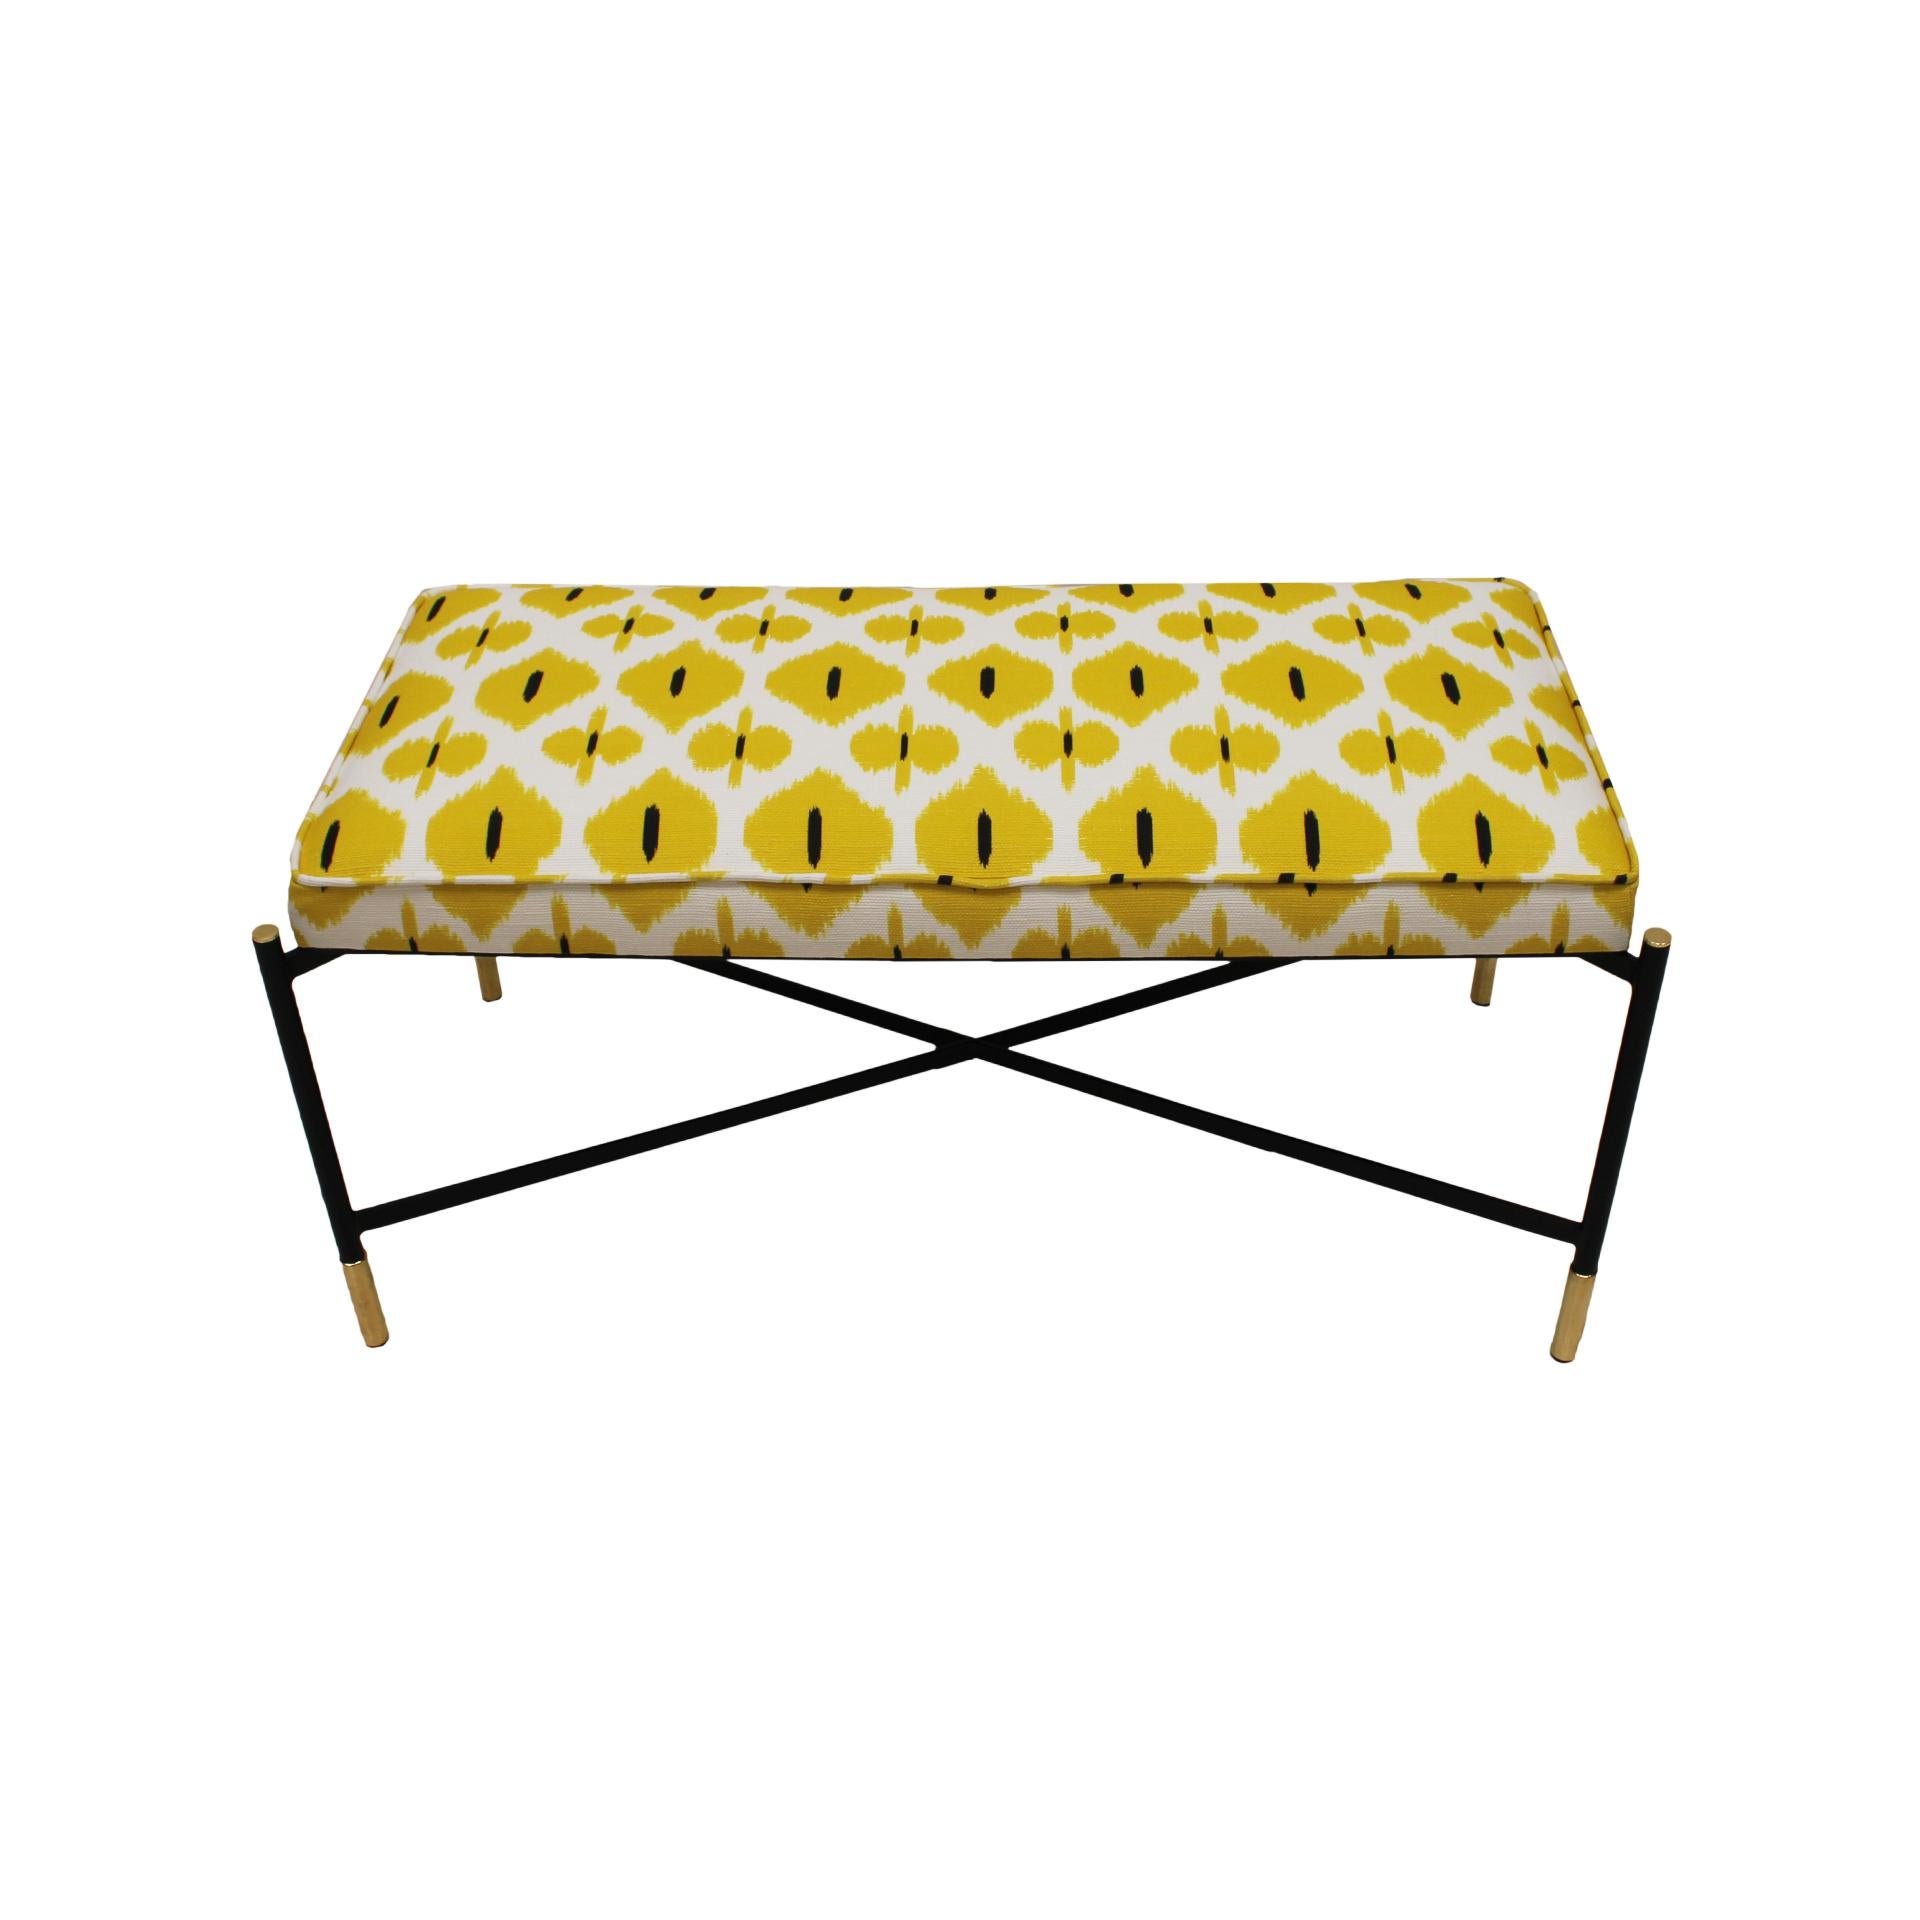 Footstool with black lacquered iron structure and legs ending in brass sleeves. It has been newly reupholstered in this stunning yellow print of cotton and linen fabric. Italy, 1970s.

Every item LA Studio offers is checked by our team of 10